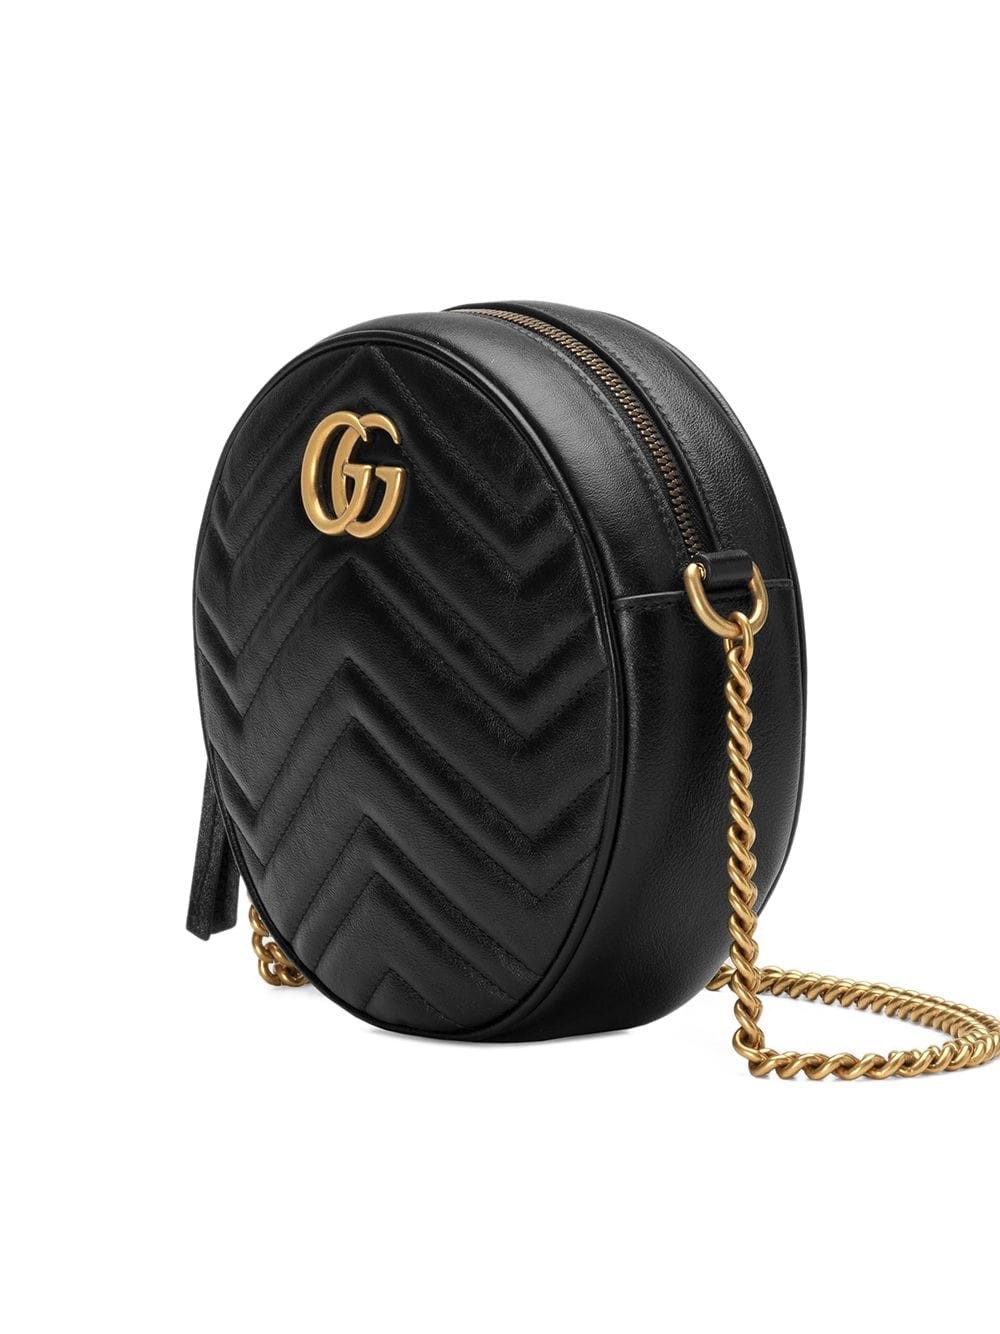 gucci GG MARMONT ROUND BAG available on wcy.wat.edu.pl - 27417